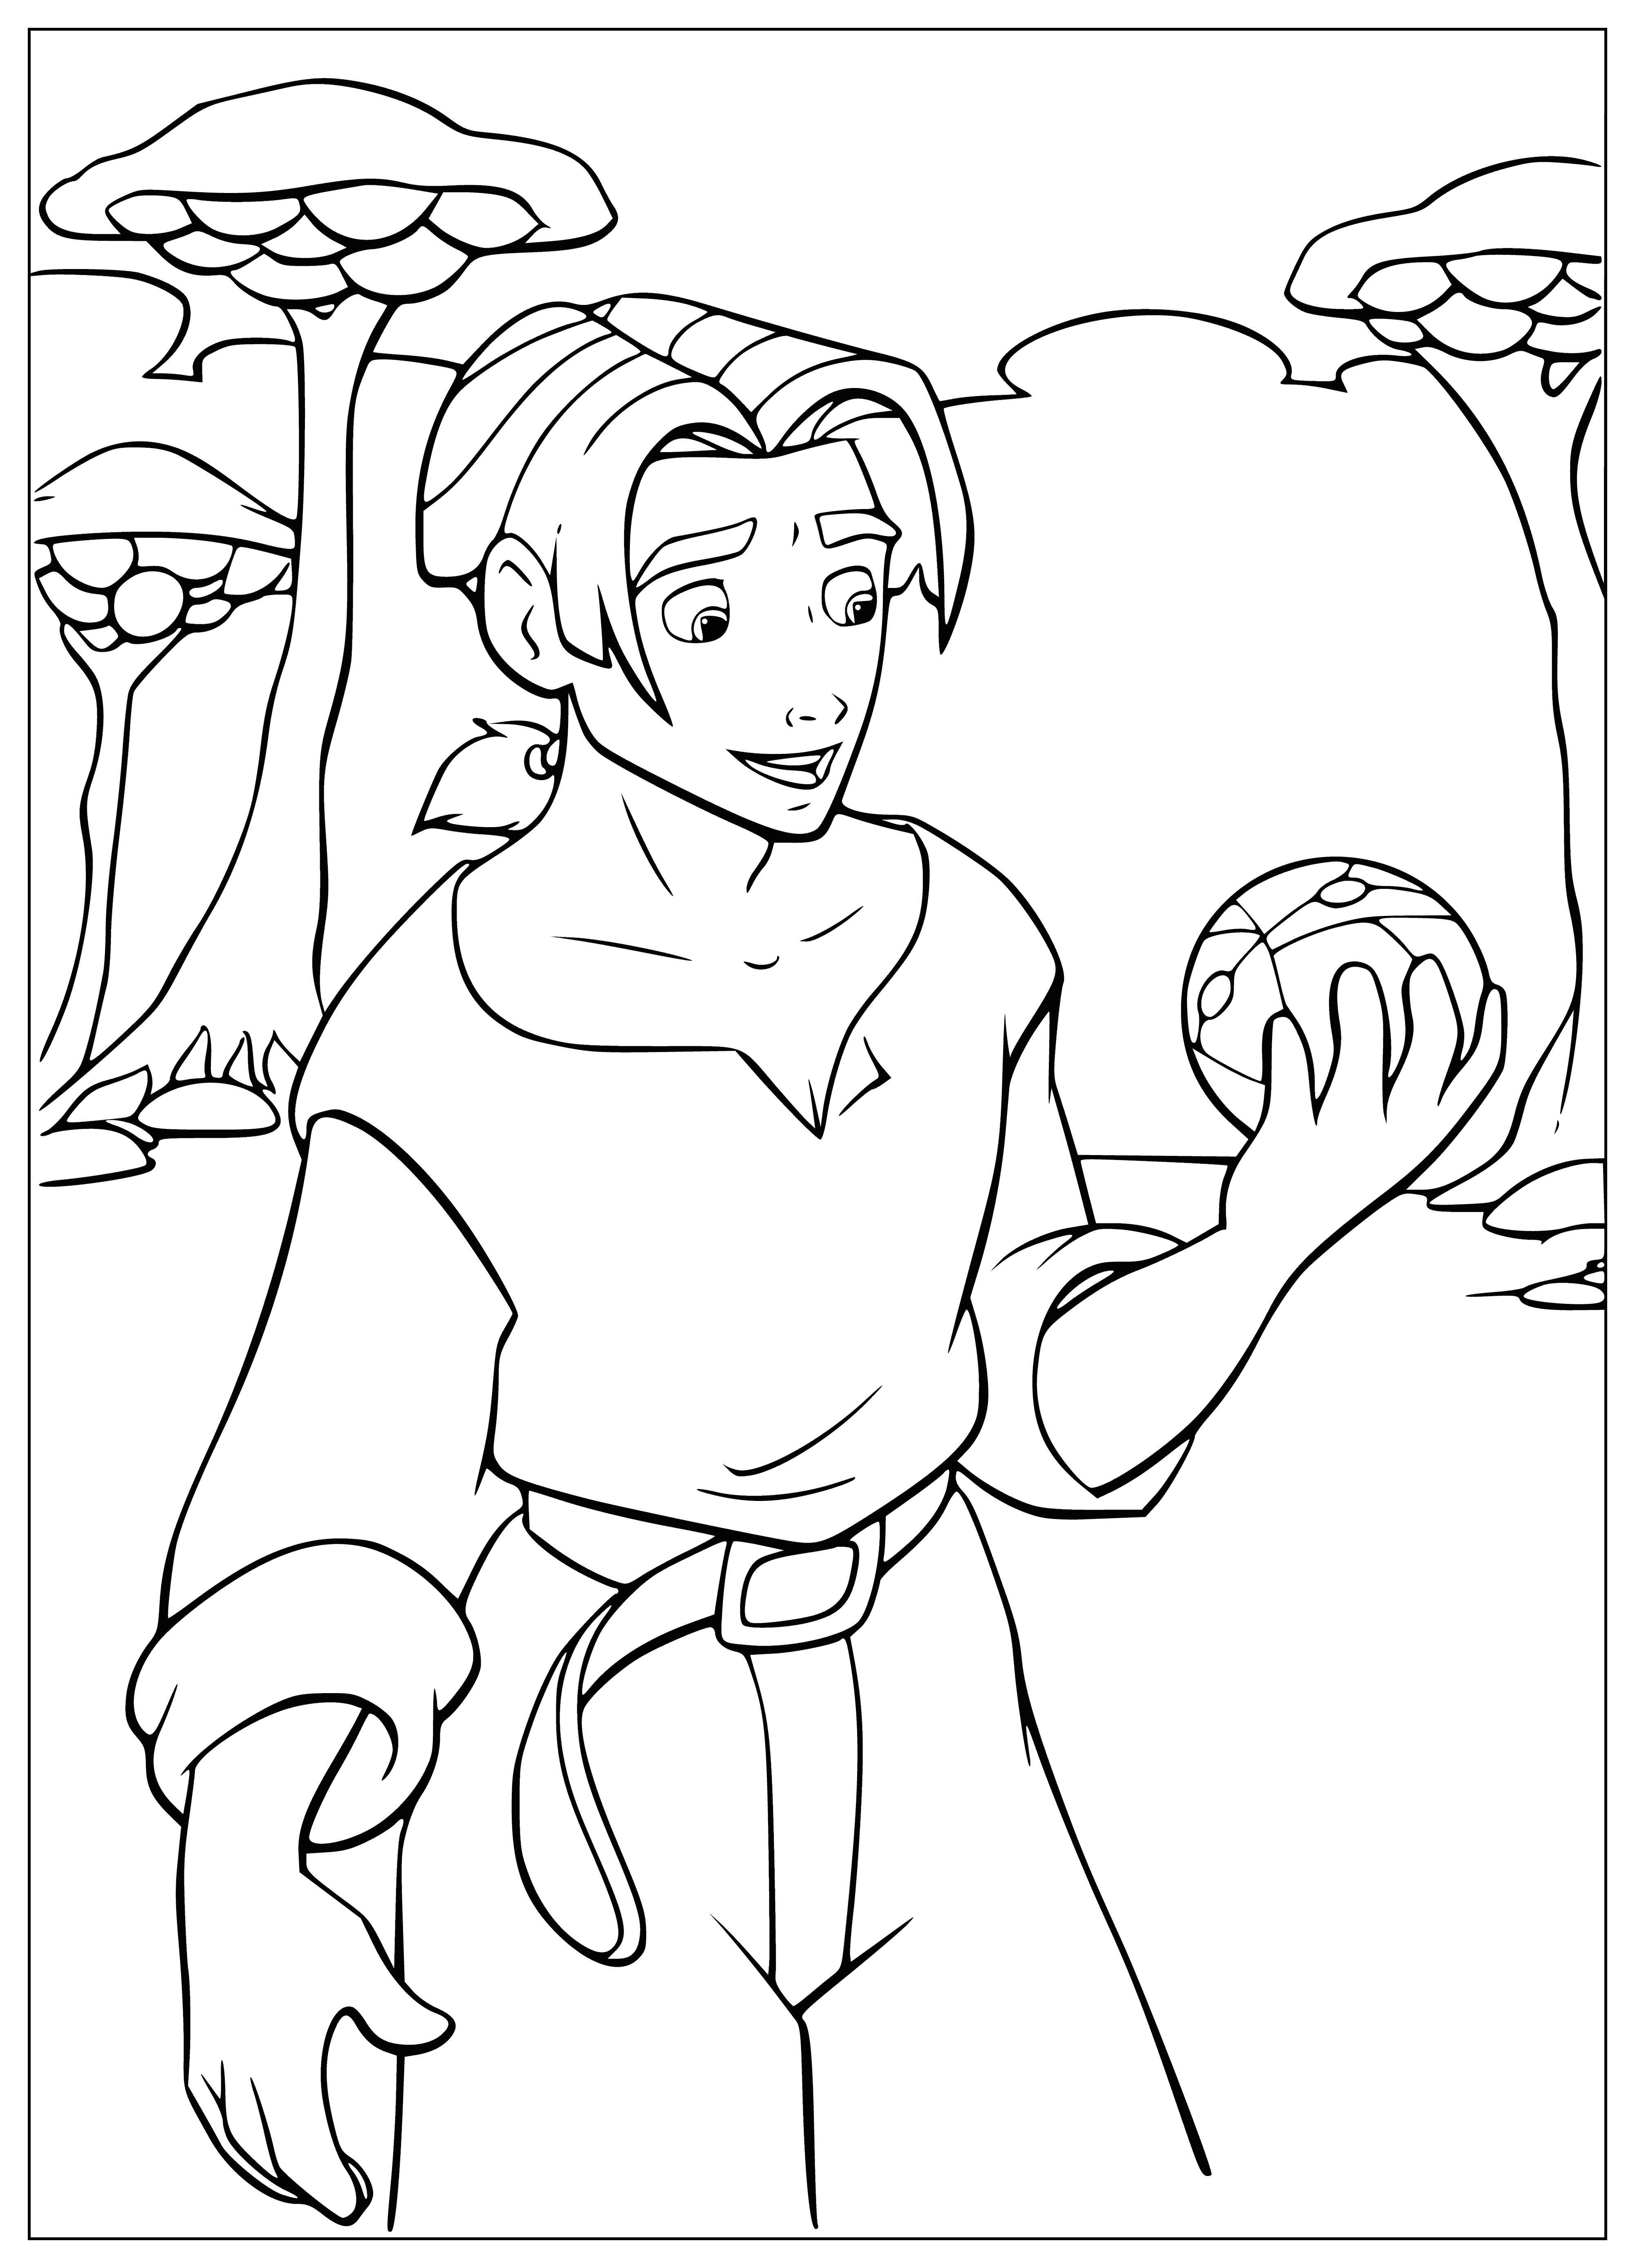 coloring page: A planet of opulent splendor and wealth, filled with riches and wonders beyond measure.